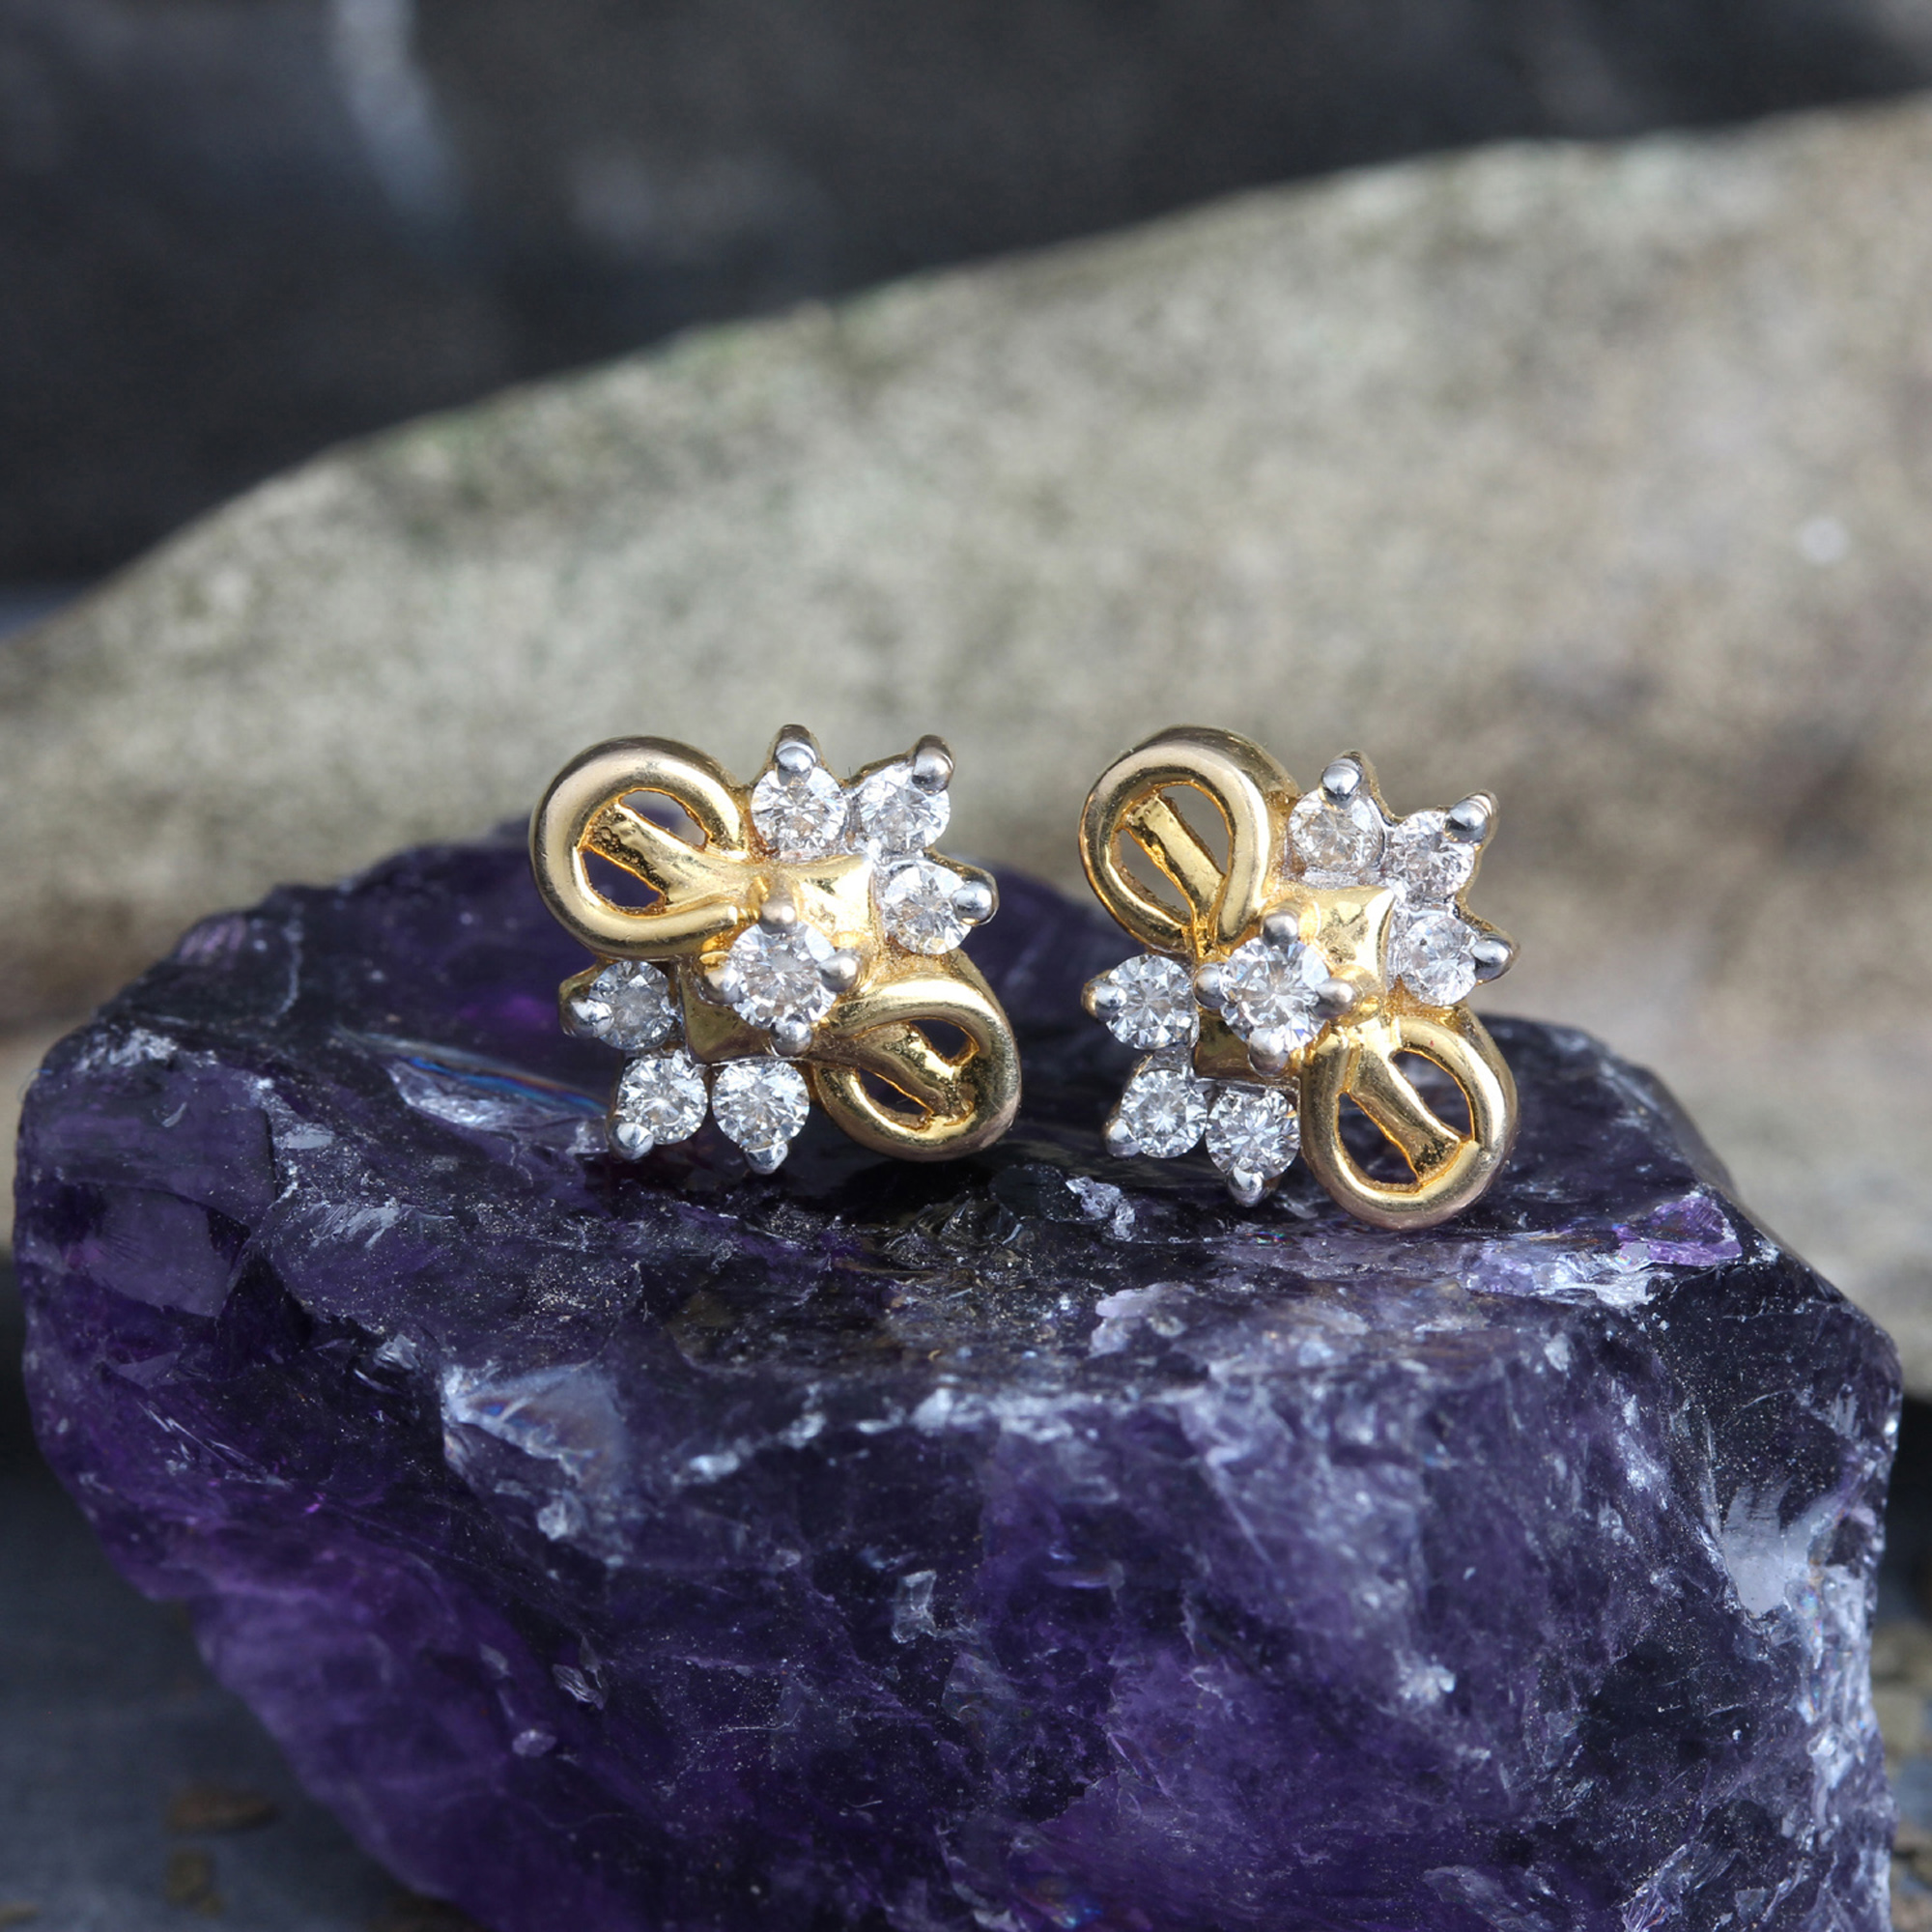 Solid Gold Earring In small Diamonds